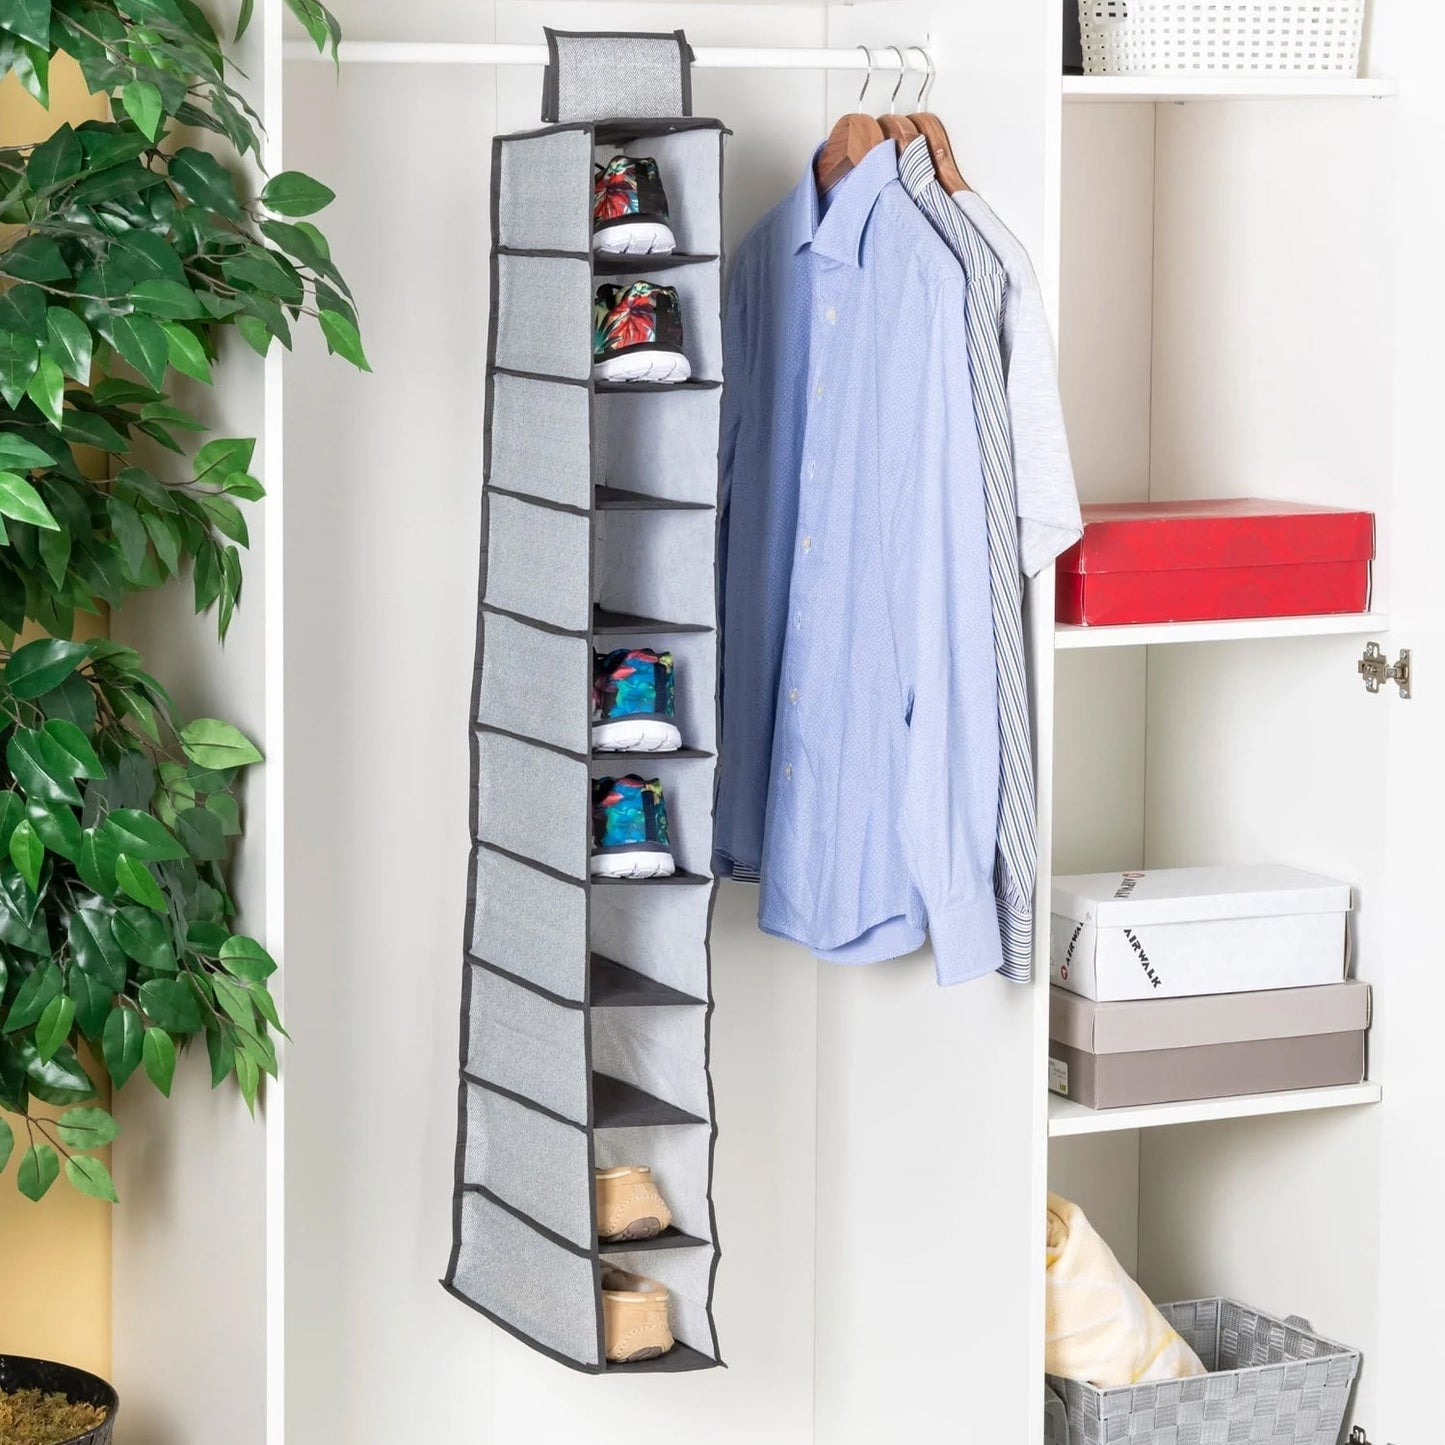 6742 10tier Multipurpose Storage Rack, Foldable, Collapsible Fabric Wardrobe Organiser for Clothes DeoDap